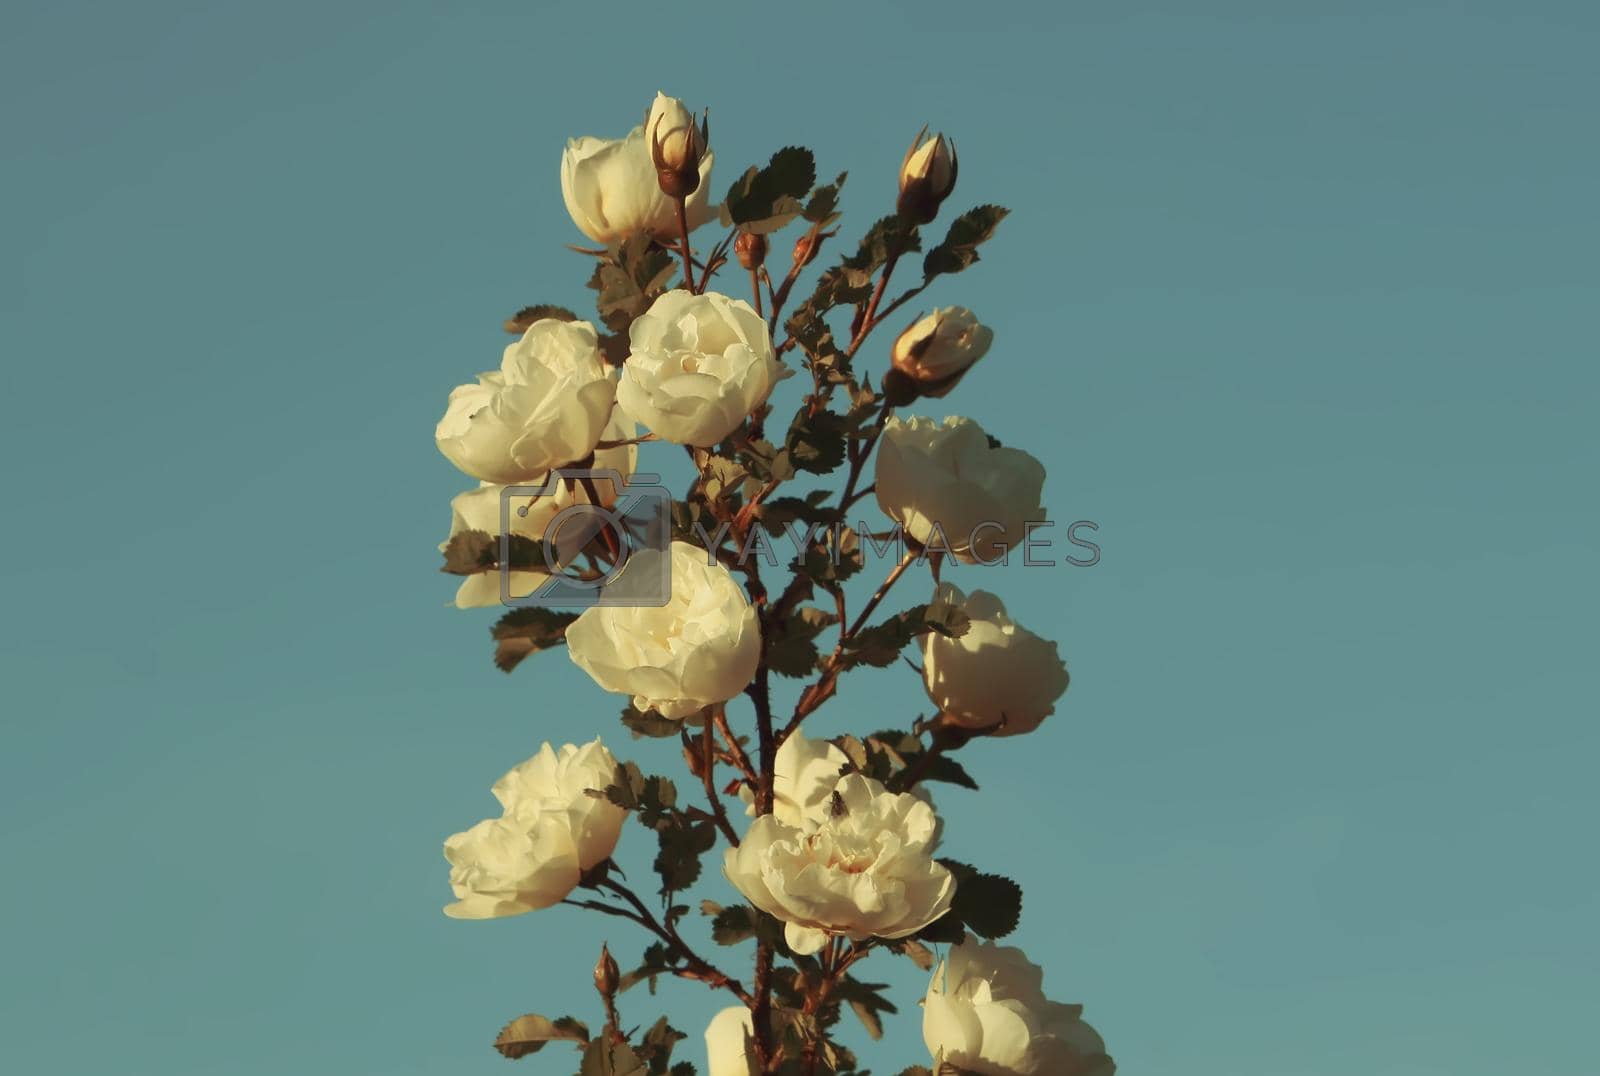 Royalty free image of Flowers of briar white rose by nightlyviolet